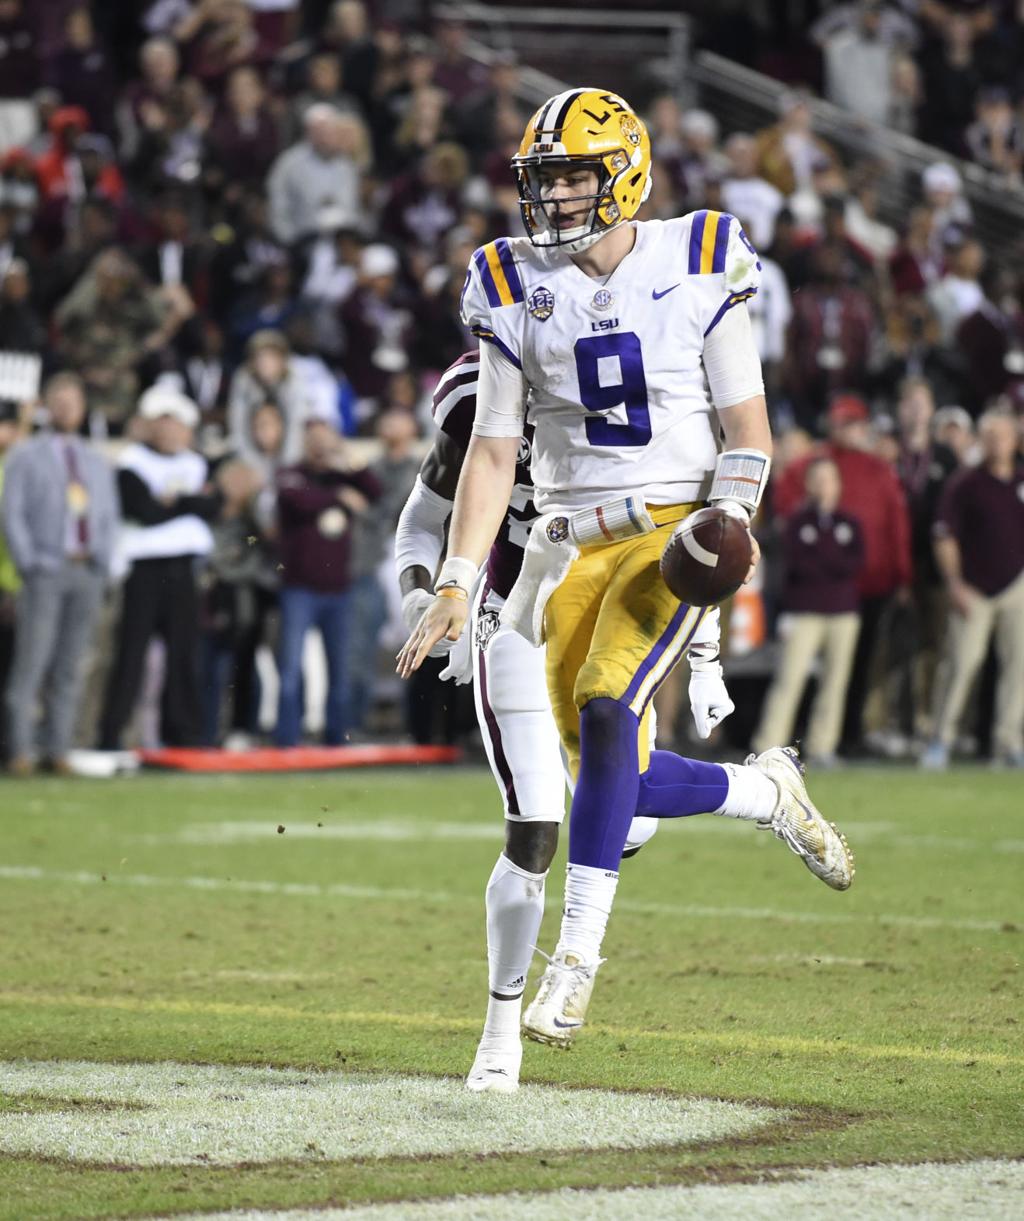 Joe Burrow risked another injury in valiant attempt to give